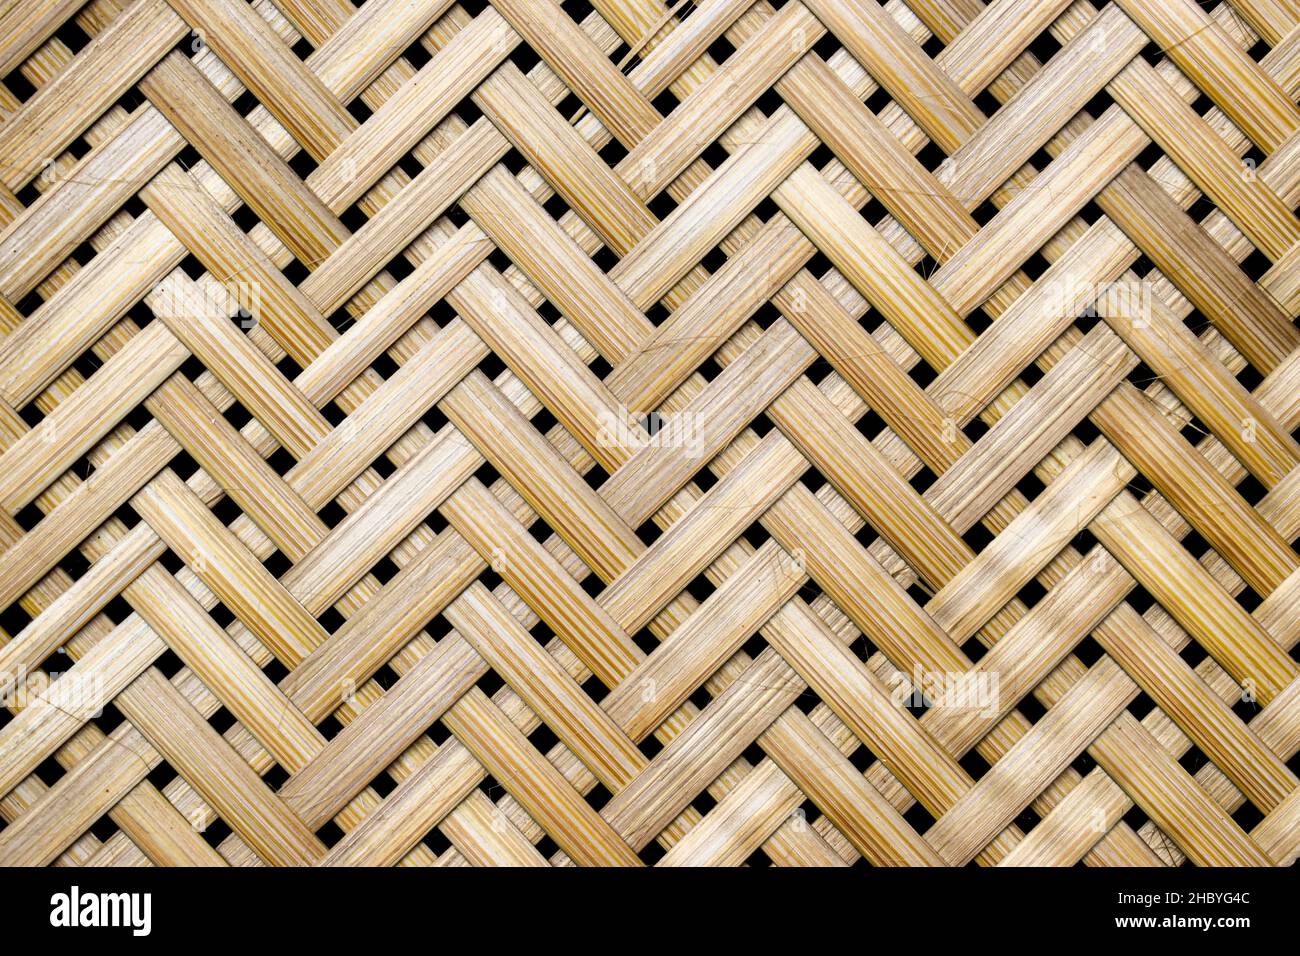 Background picture of natural bamboo mat pattern. Made in Asian, Myanmar. Stock Photo